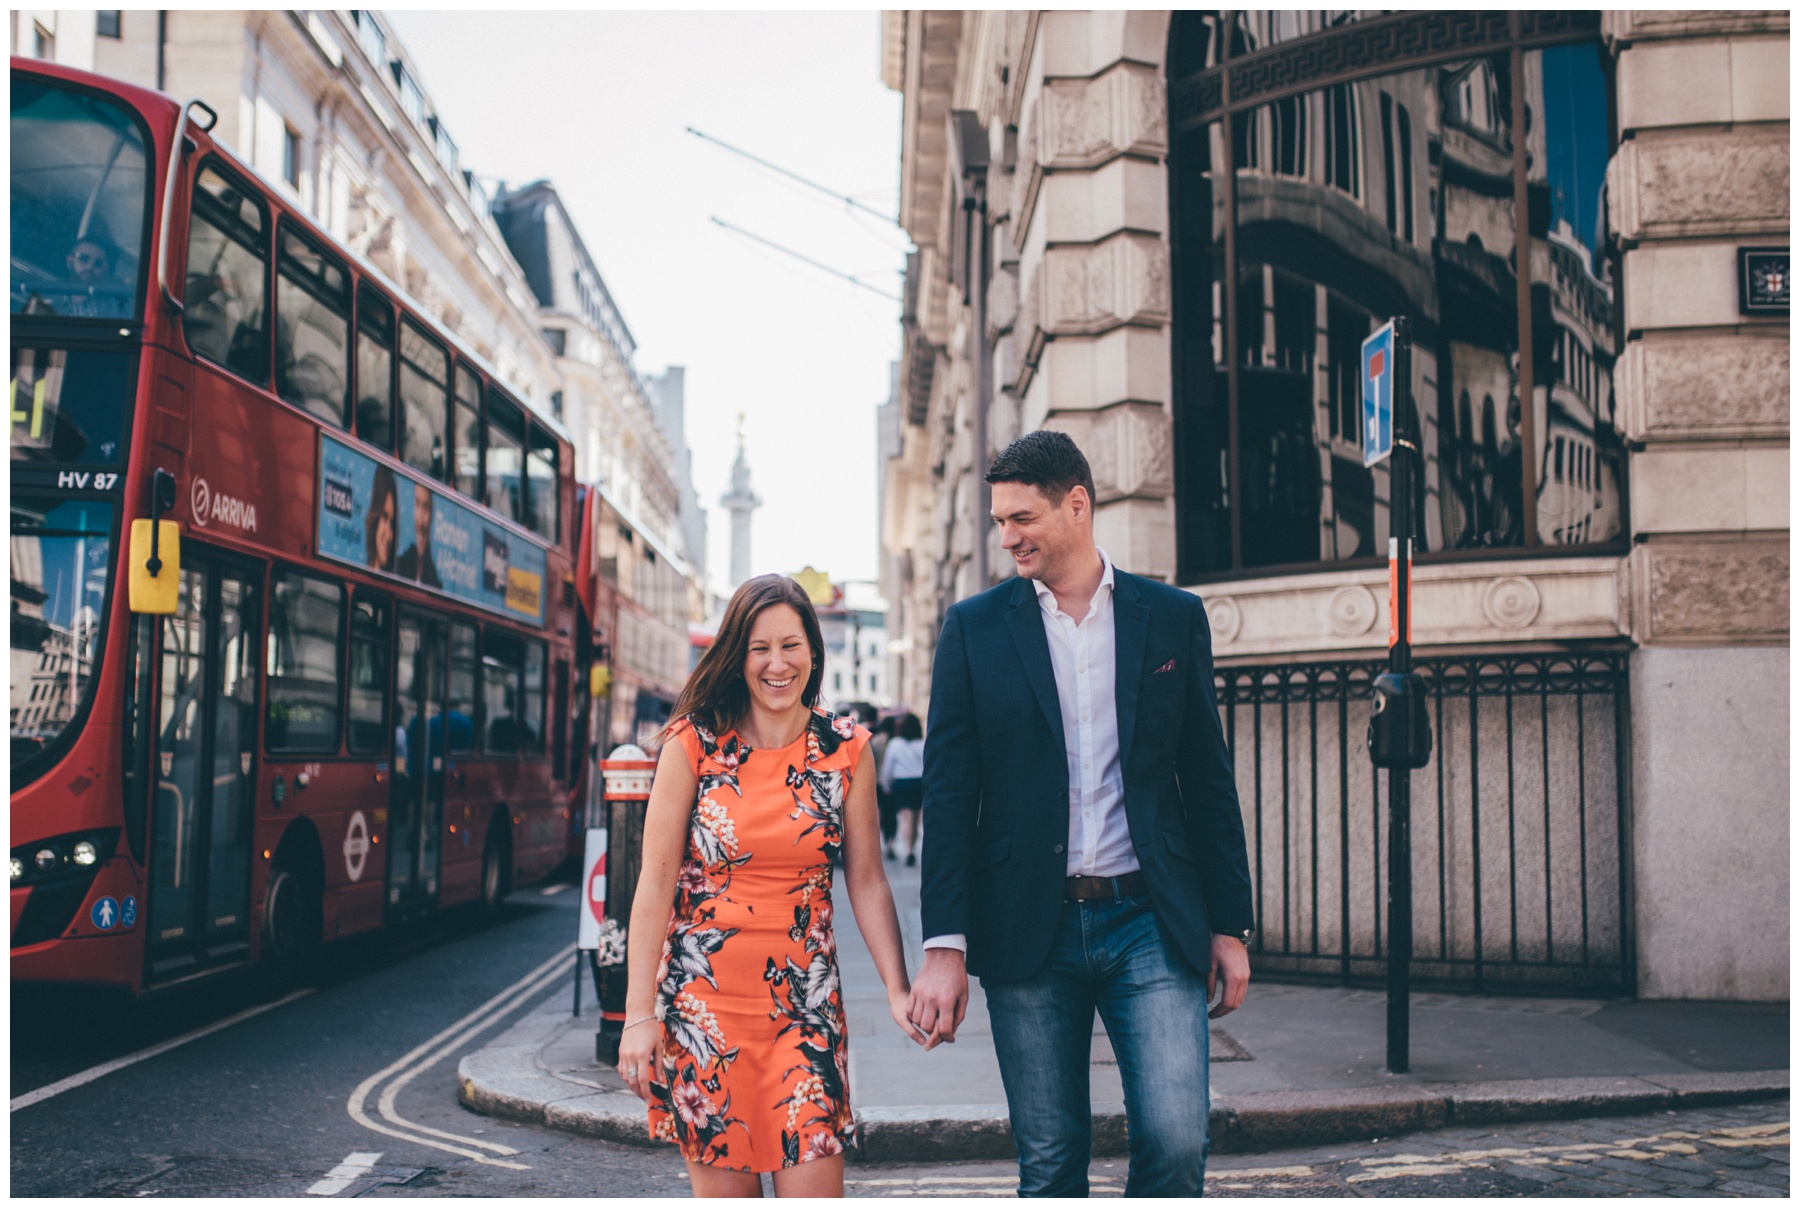 Cute couple stroll through London city centre together for their engagement shoot.